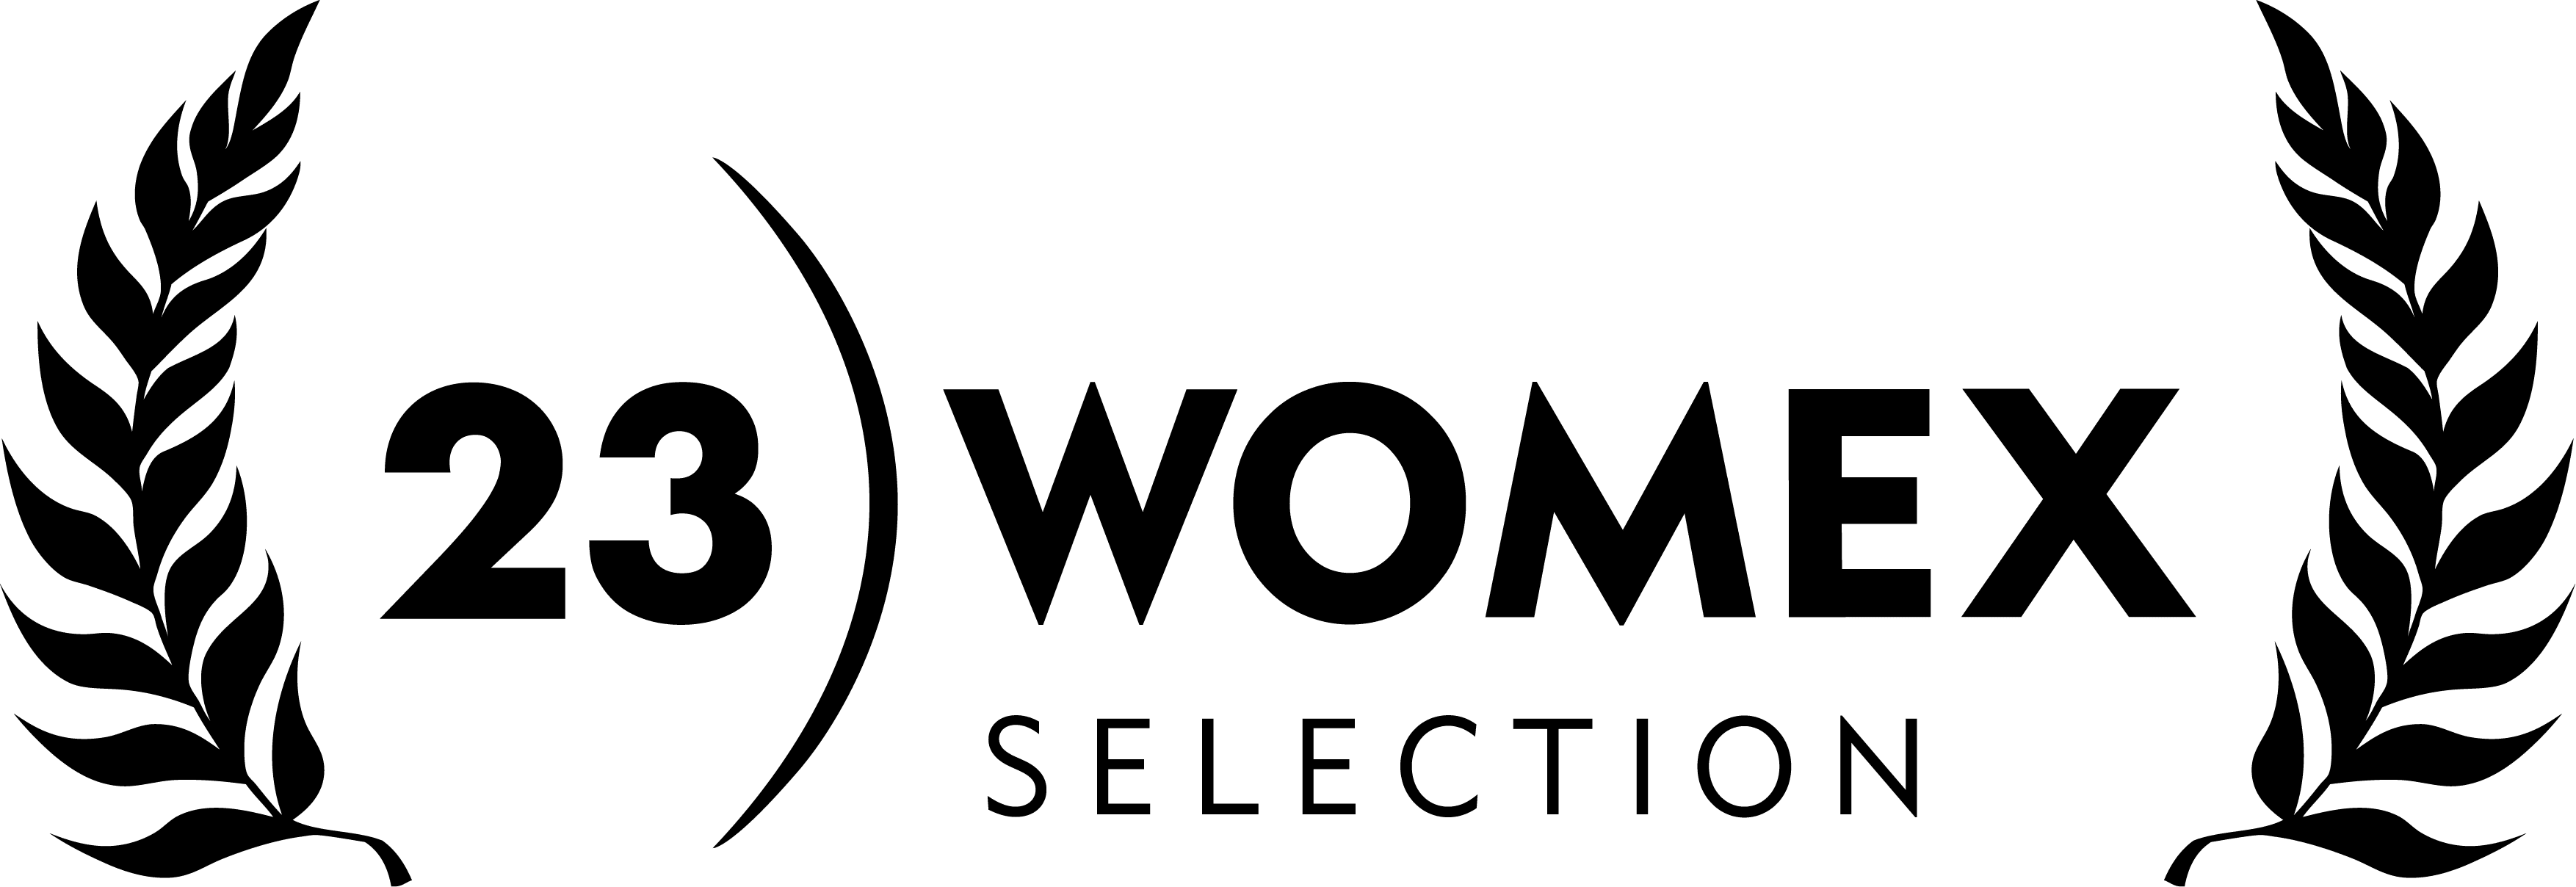 WOMEX23_Selection_black